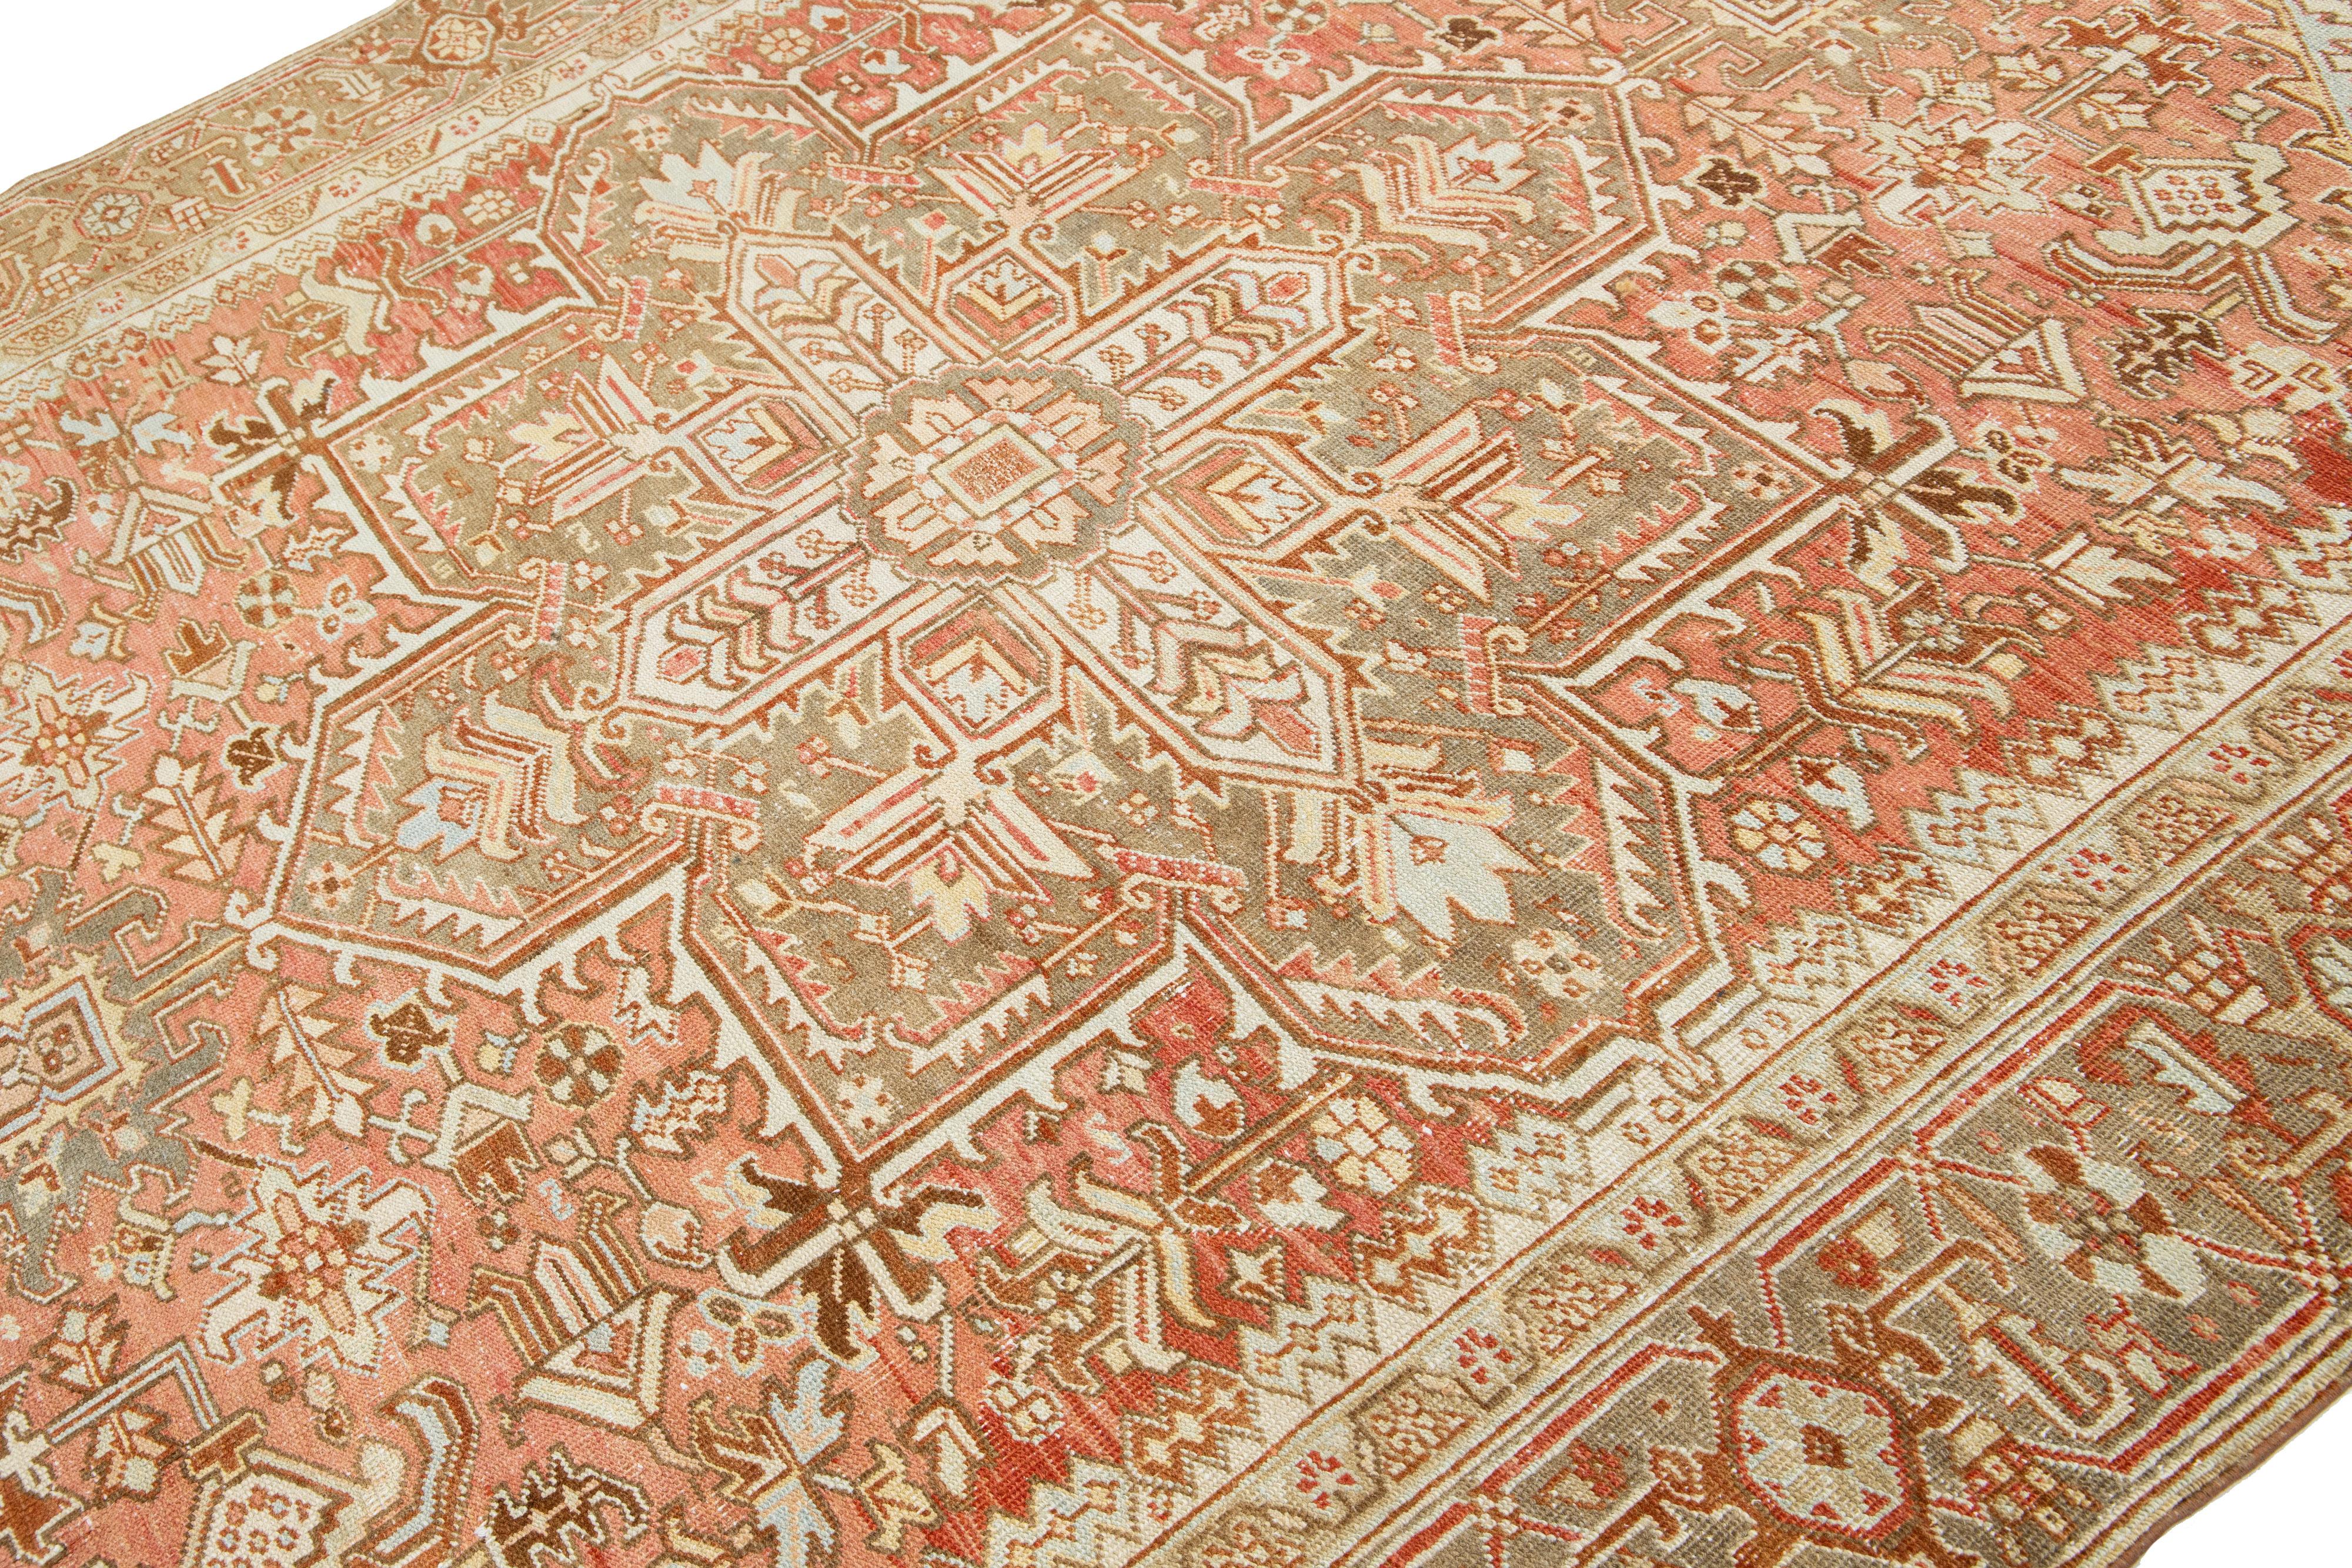 Heriz Serapi 1920s Persian Heriz Antique Wool Rug In Rust Color Featuring a Medallion Motif For Sale